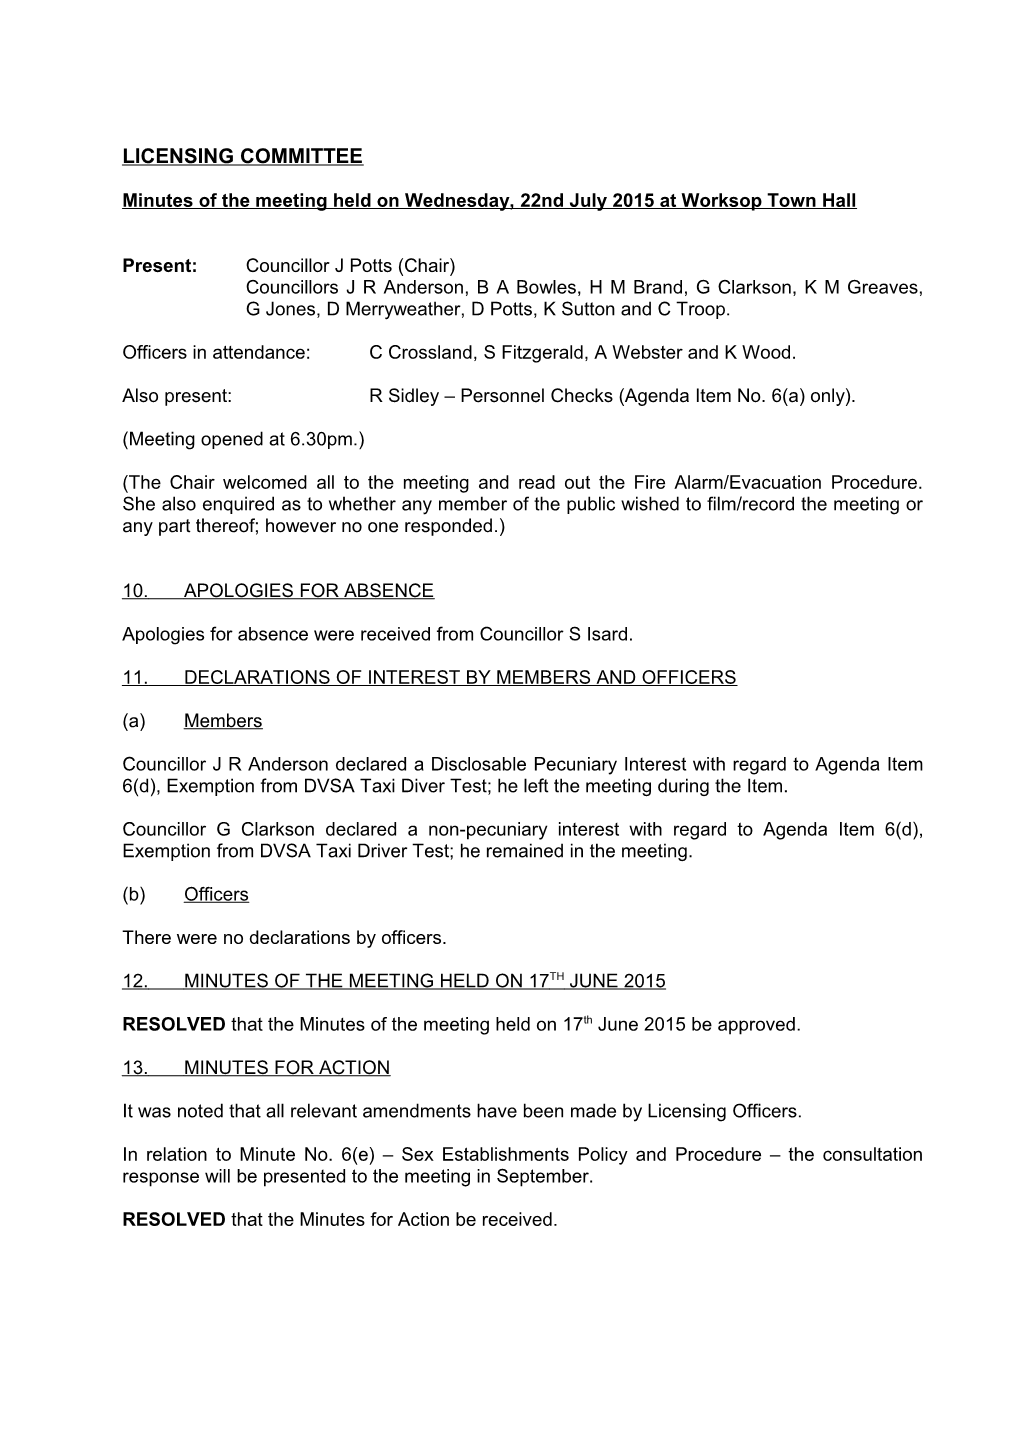 Minutes of the Meeting Held on Wednesday, 22Nd July 2015 at Worksop Town Hall